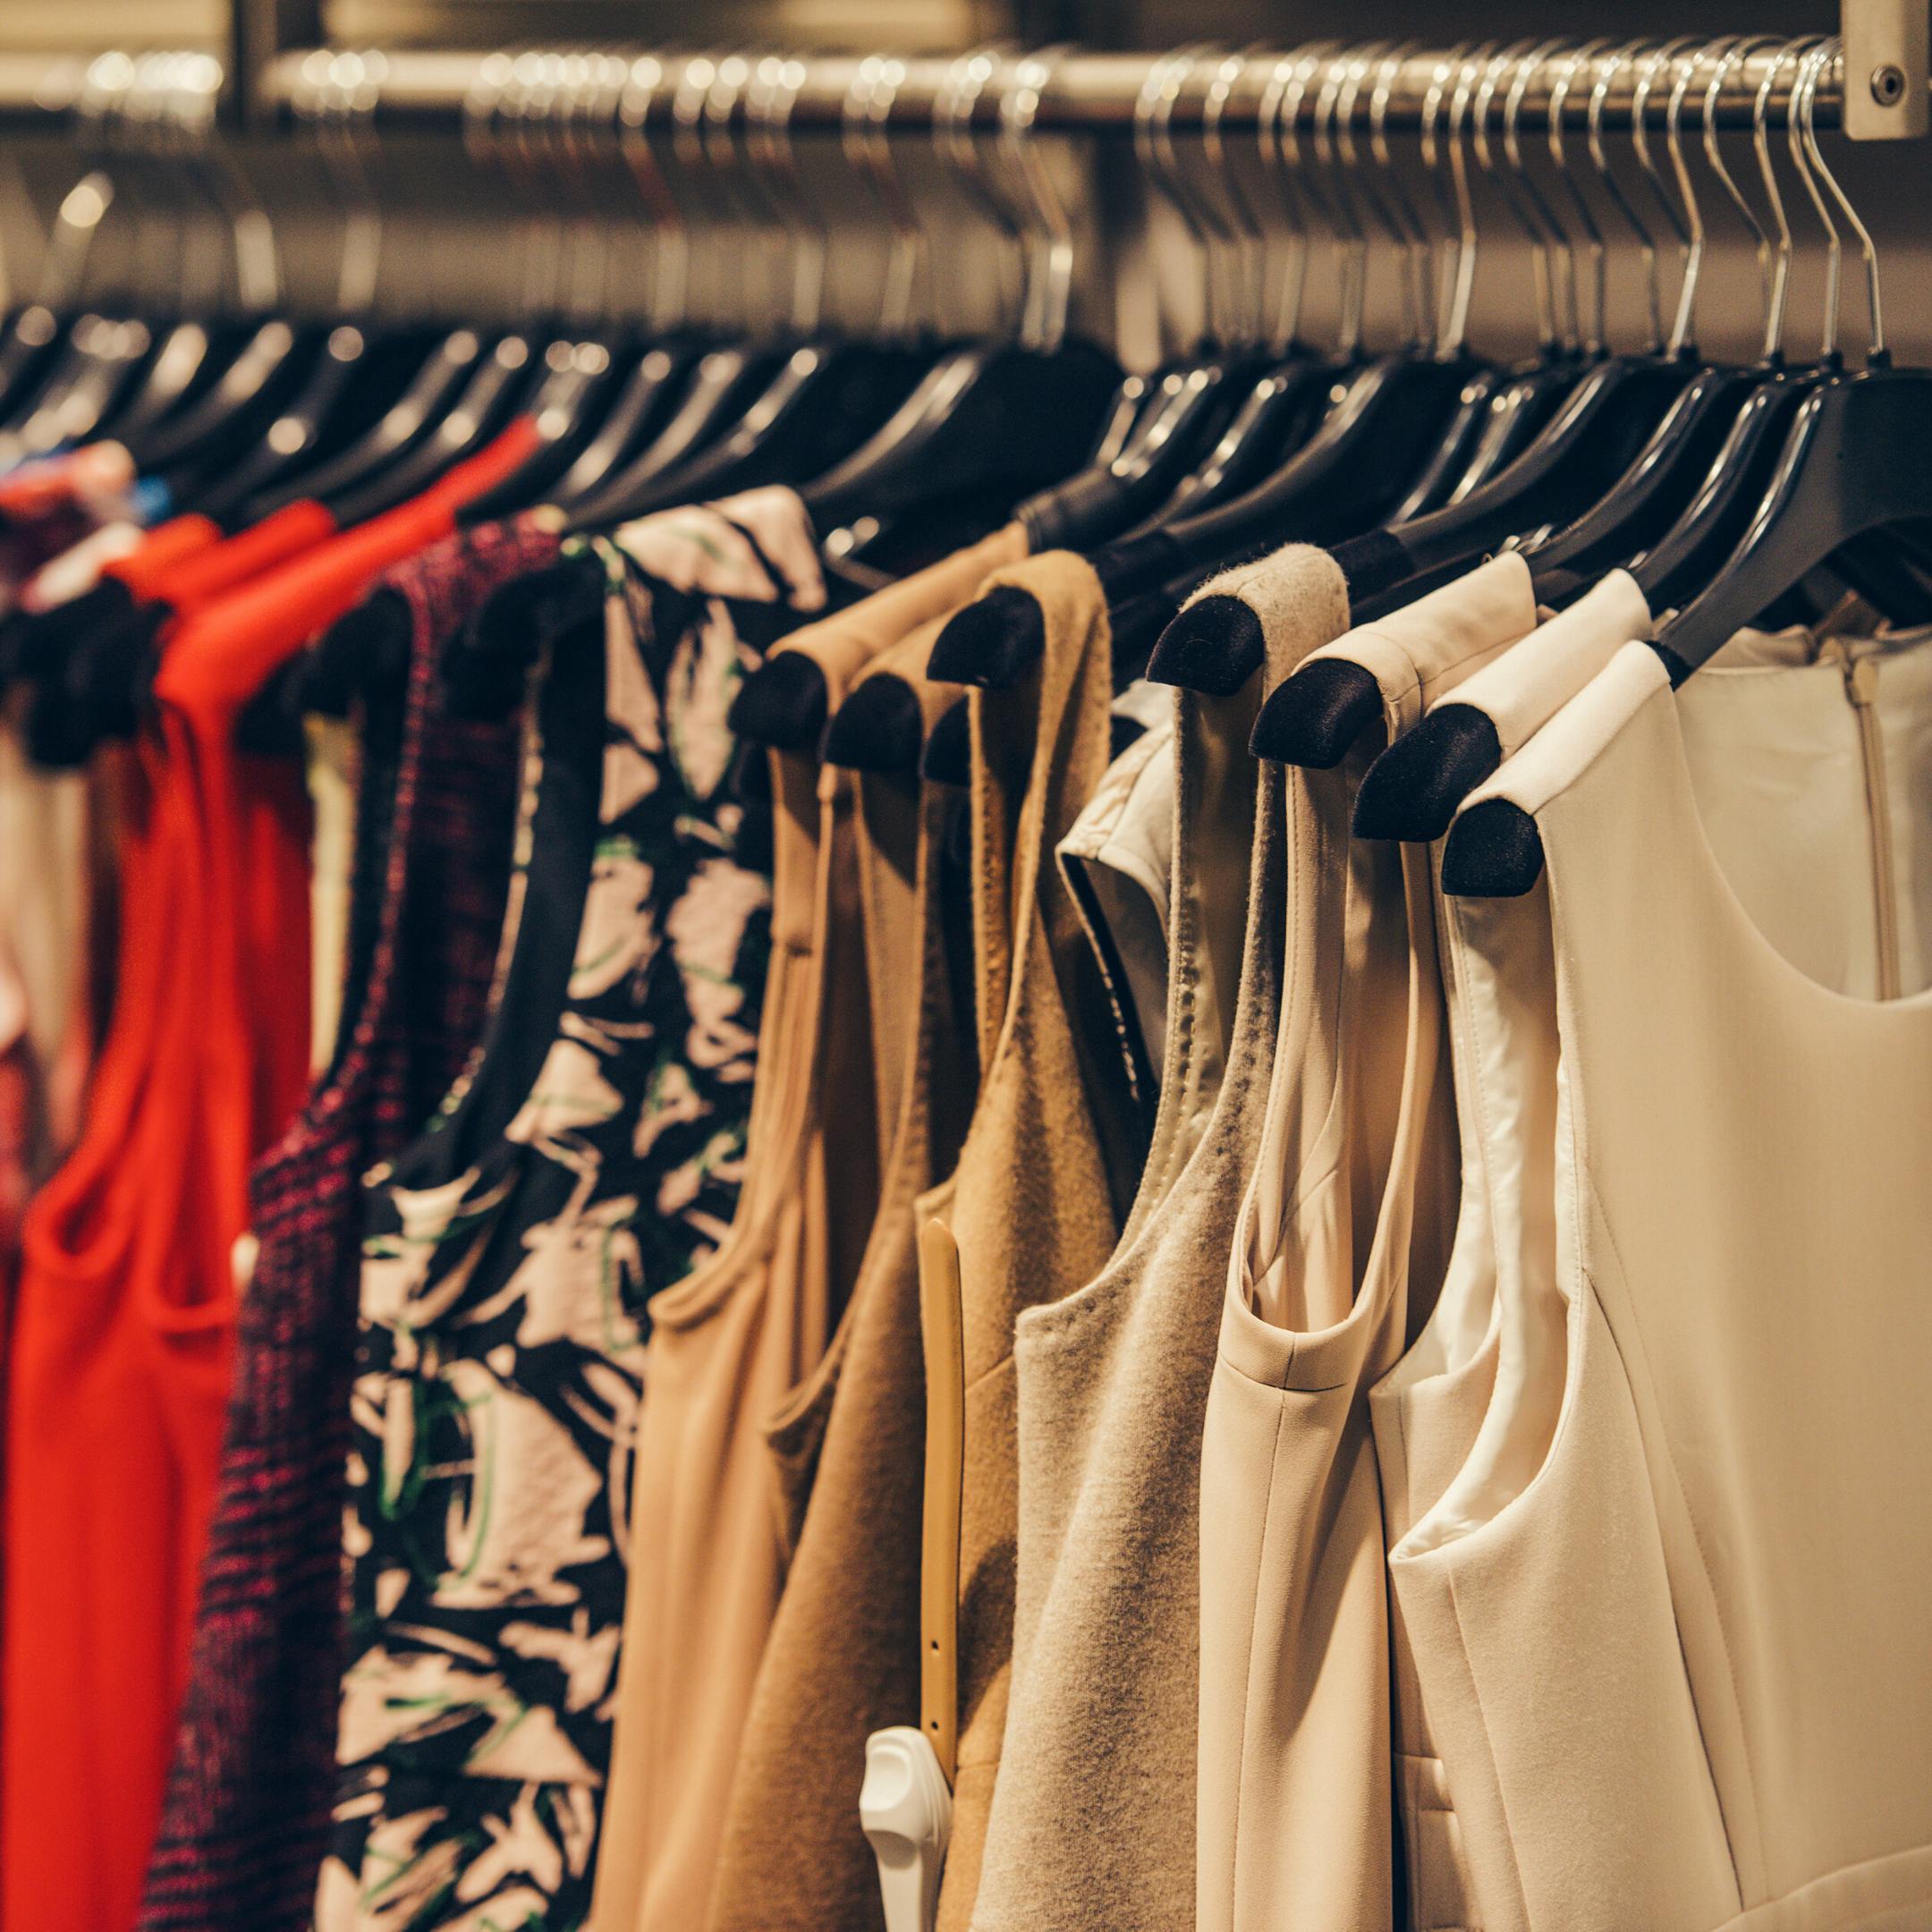 Easy tips for building a capsule wardrobe